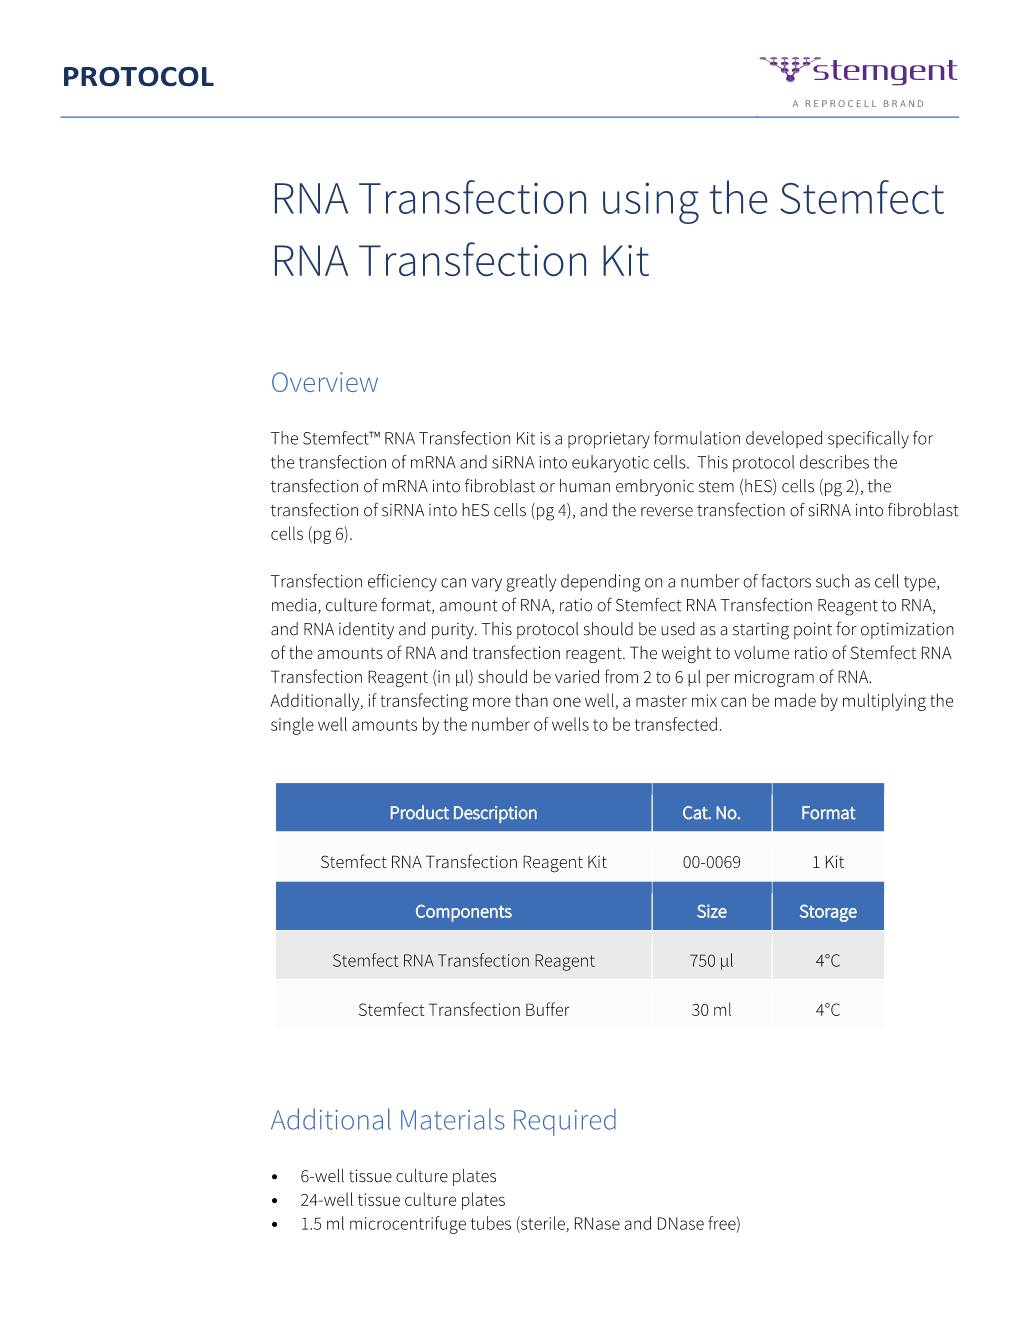 PROTOCOL: RNA Transfection Using the Stemfect RNA Transfection Kit Page 2 of 6